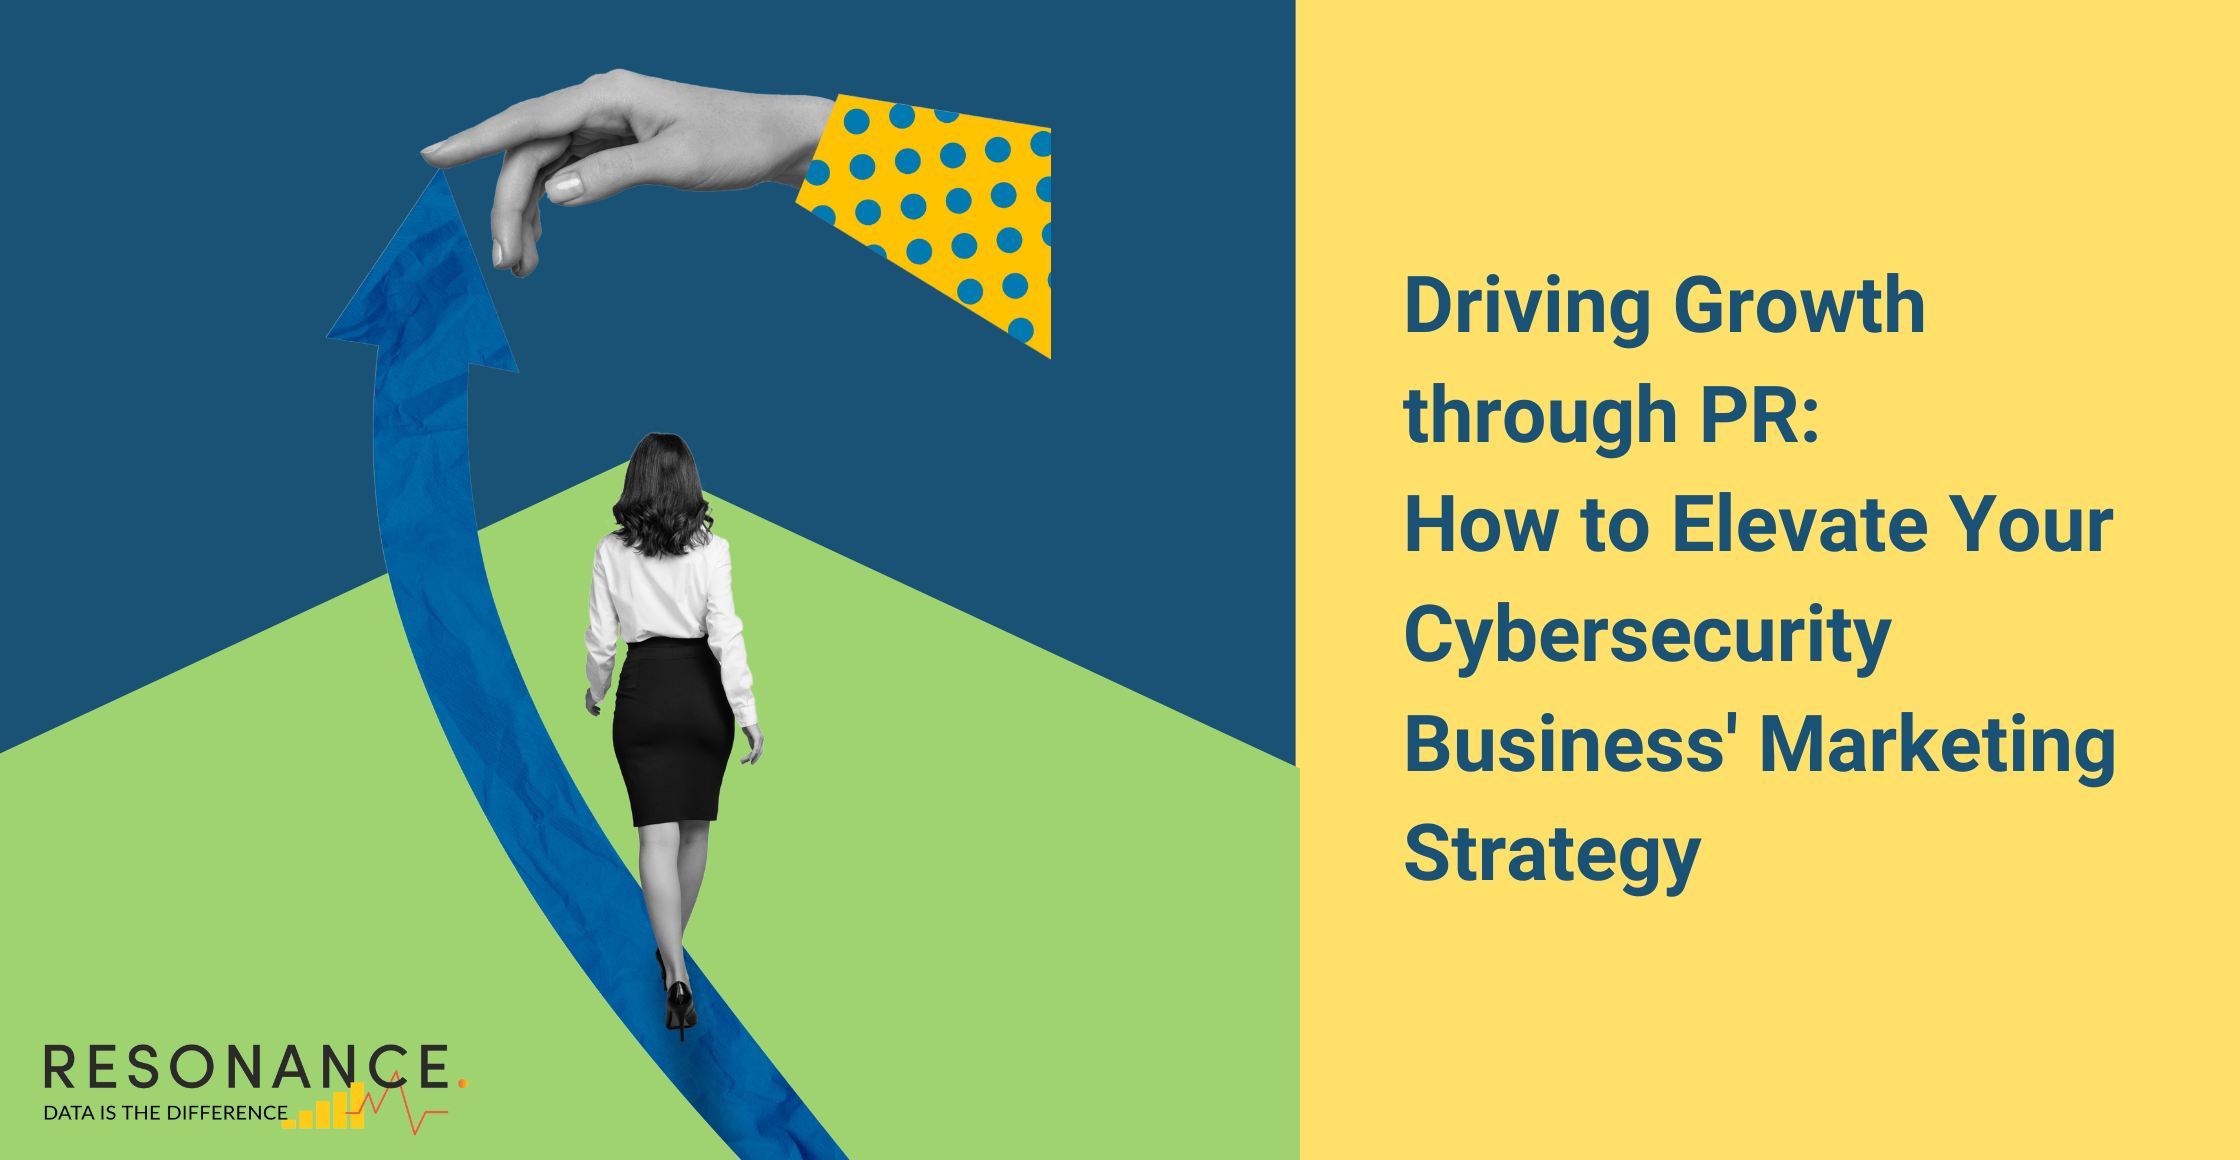 Driving Growth through PR: How to Elevate Your Cybersecurity Business' Marketing Strategy